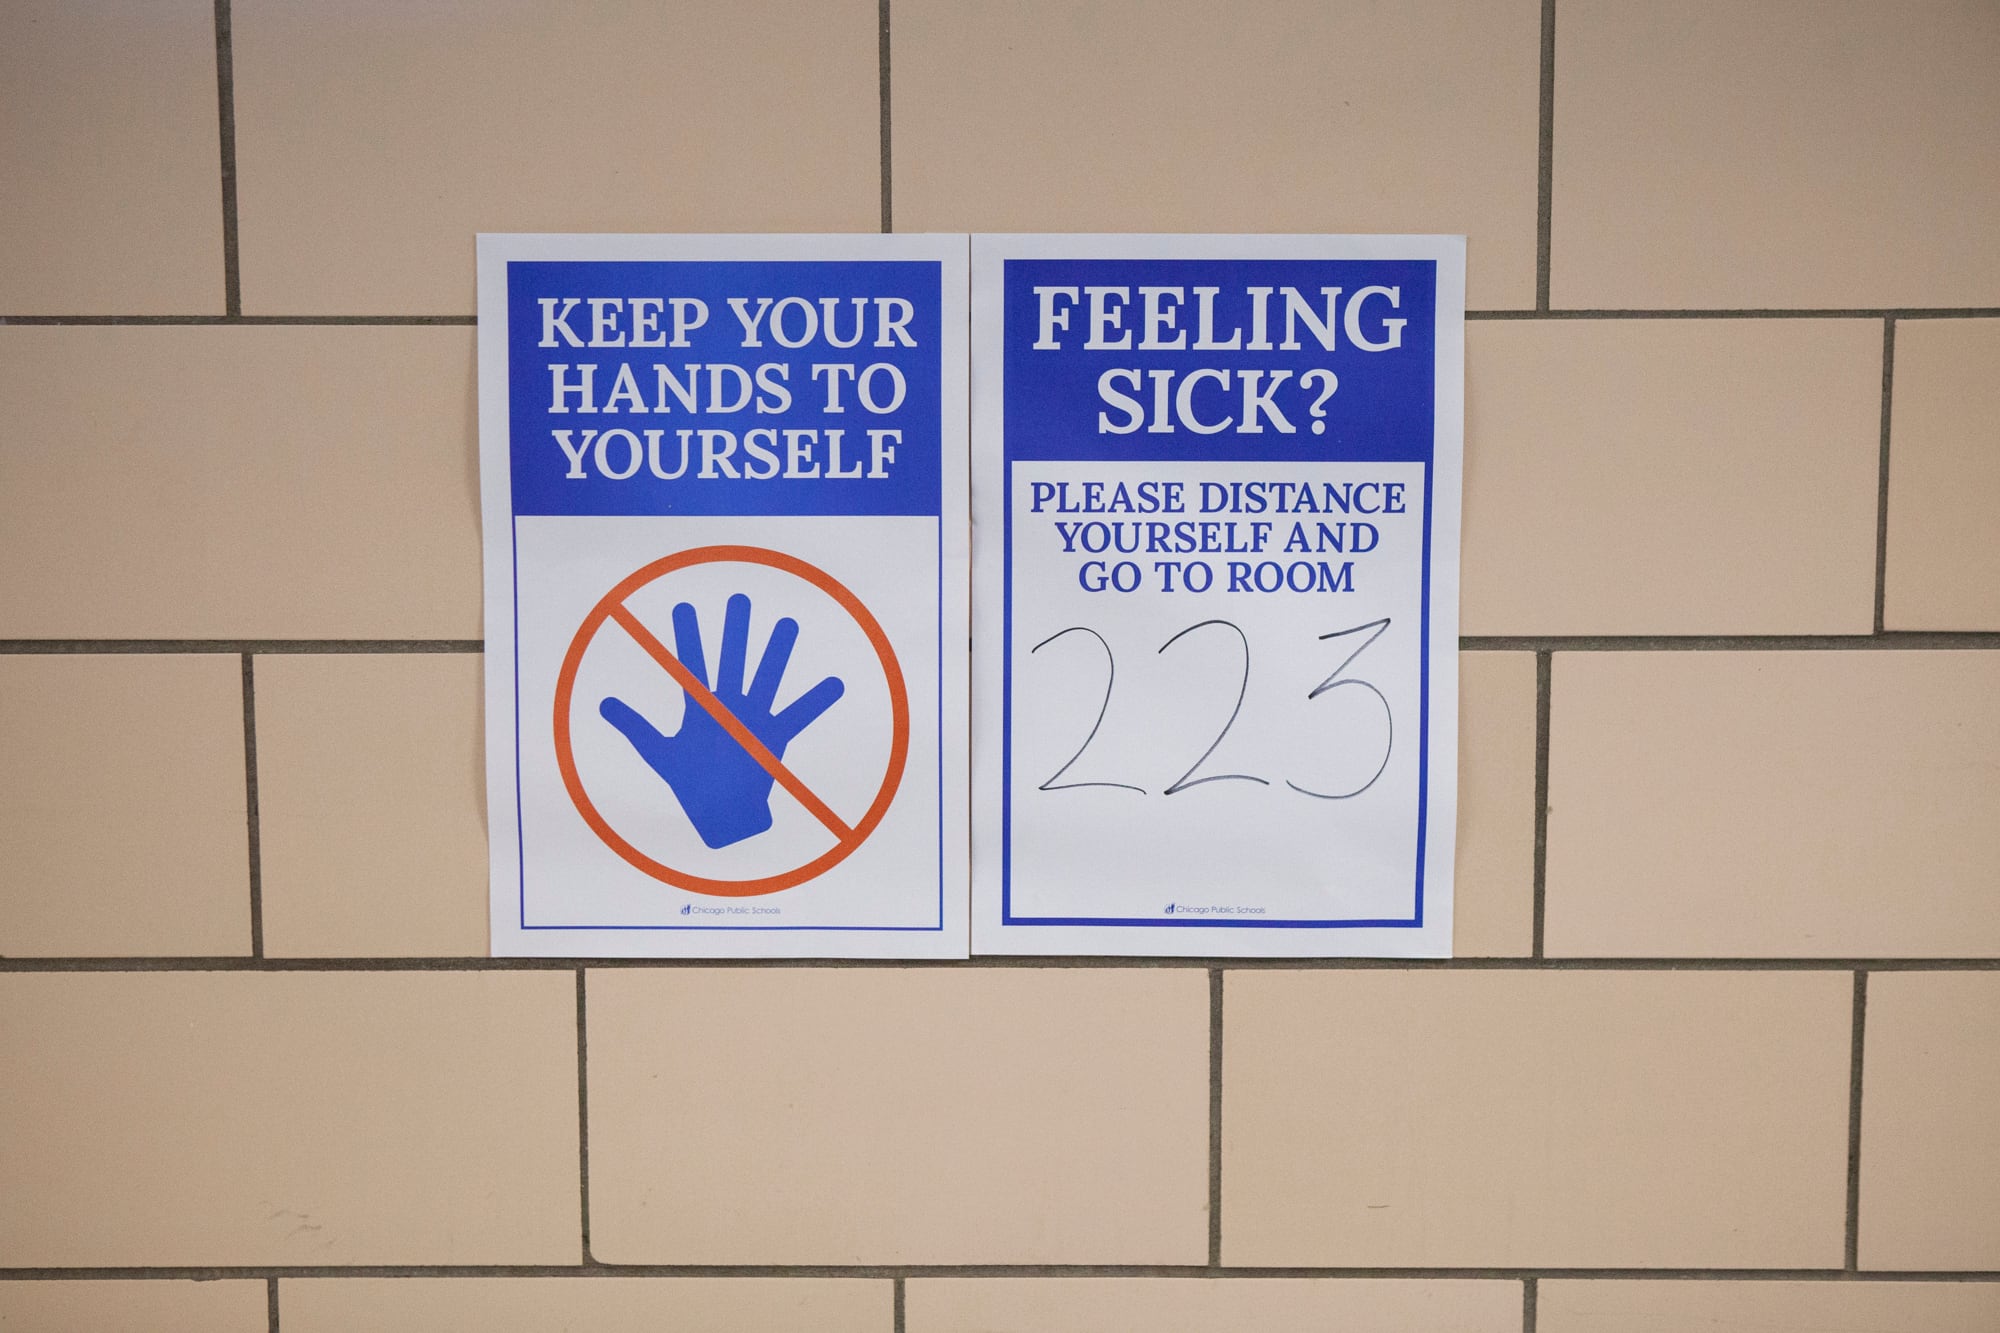 Posters in school hallway reminding students to keep their hands to themselves and stay distant if feeling sick.